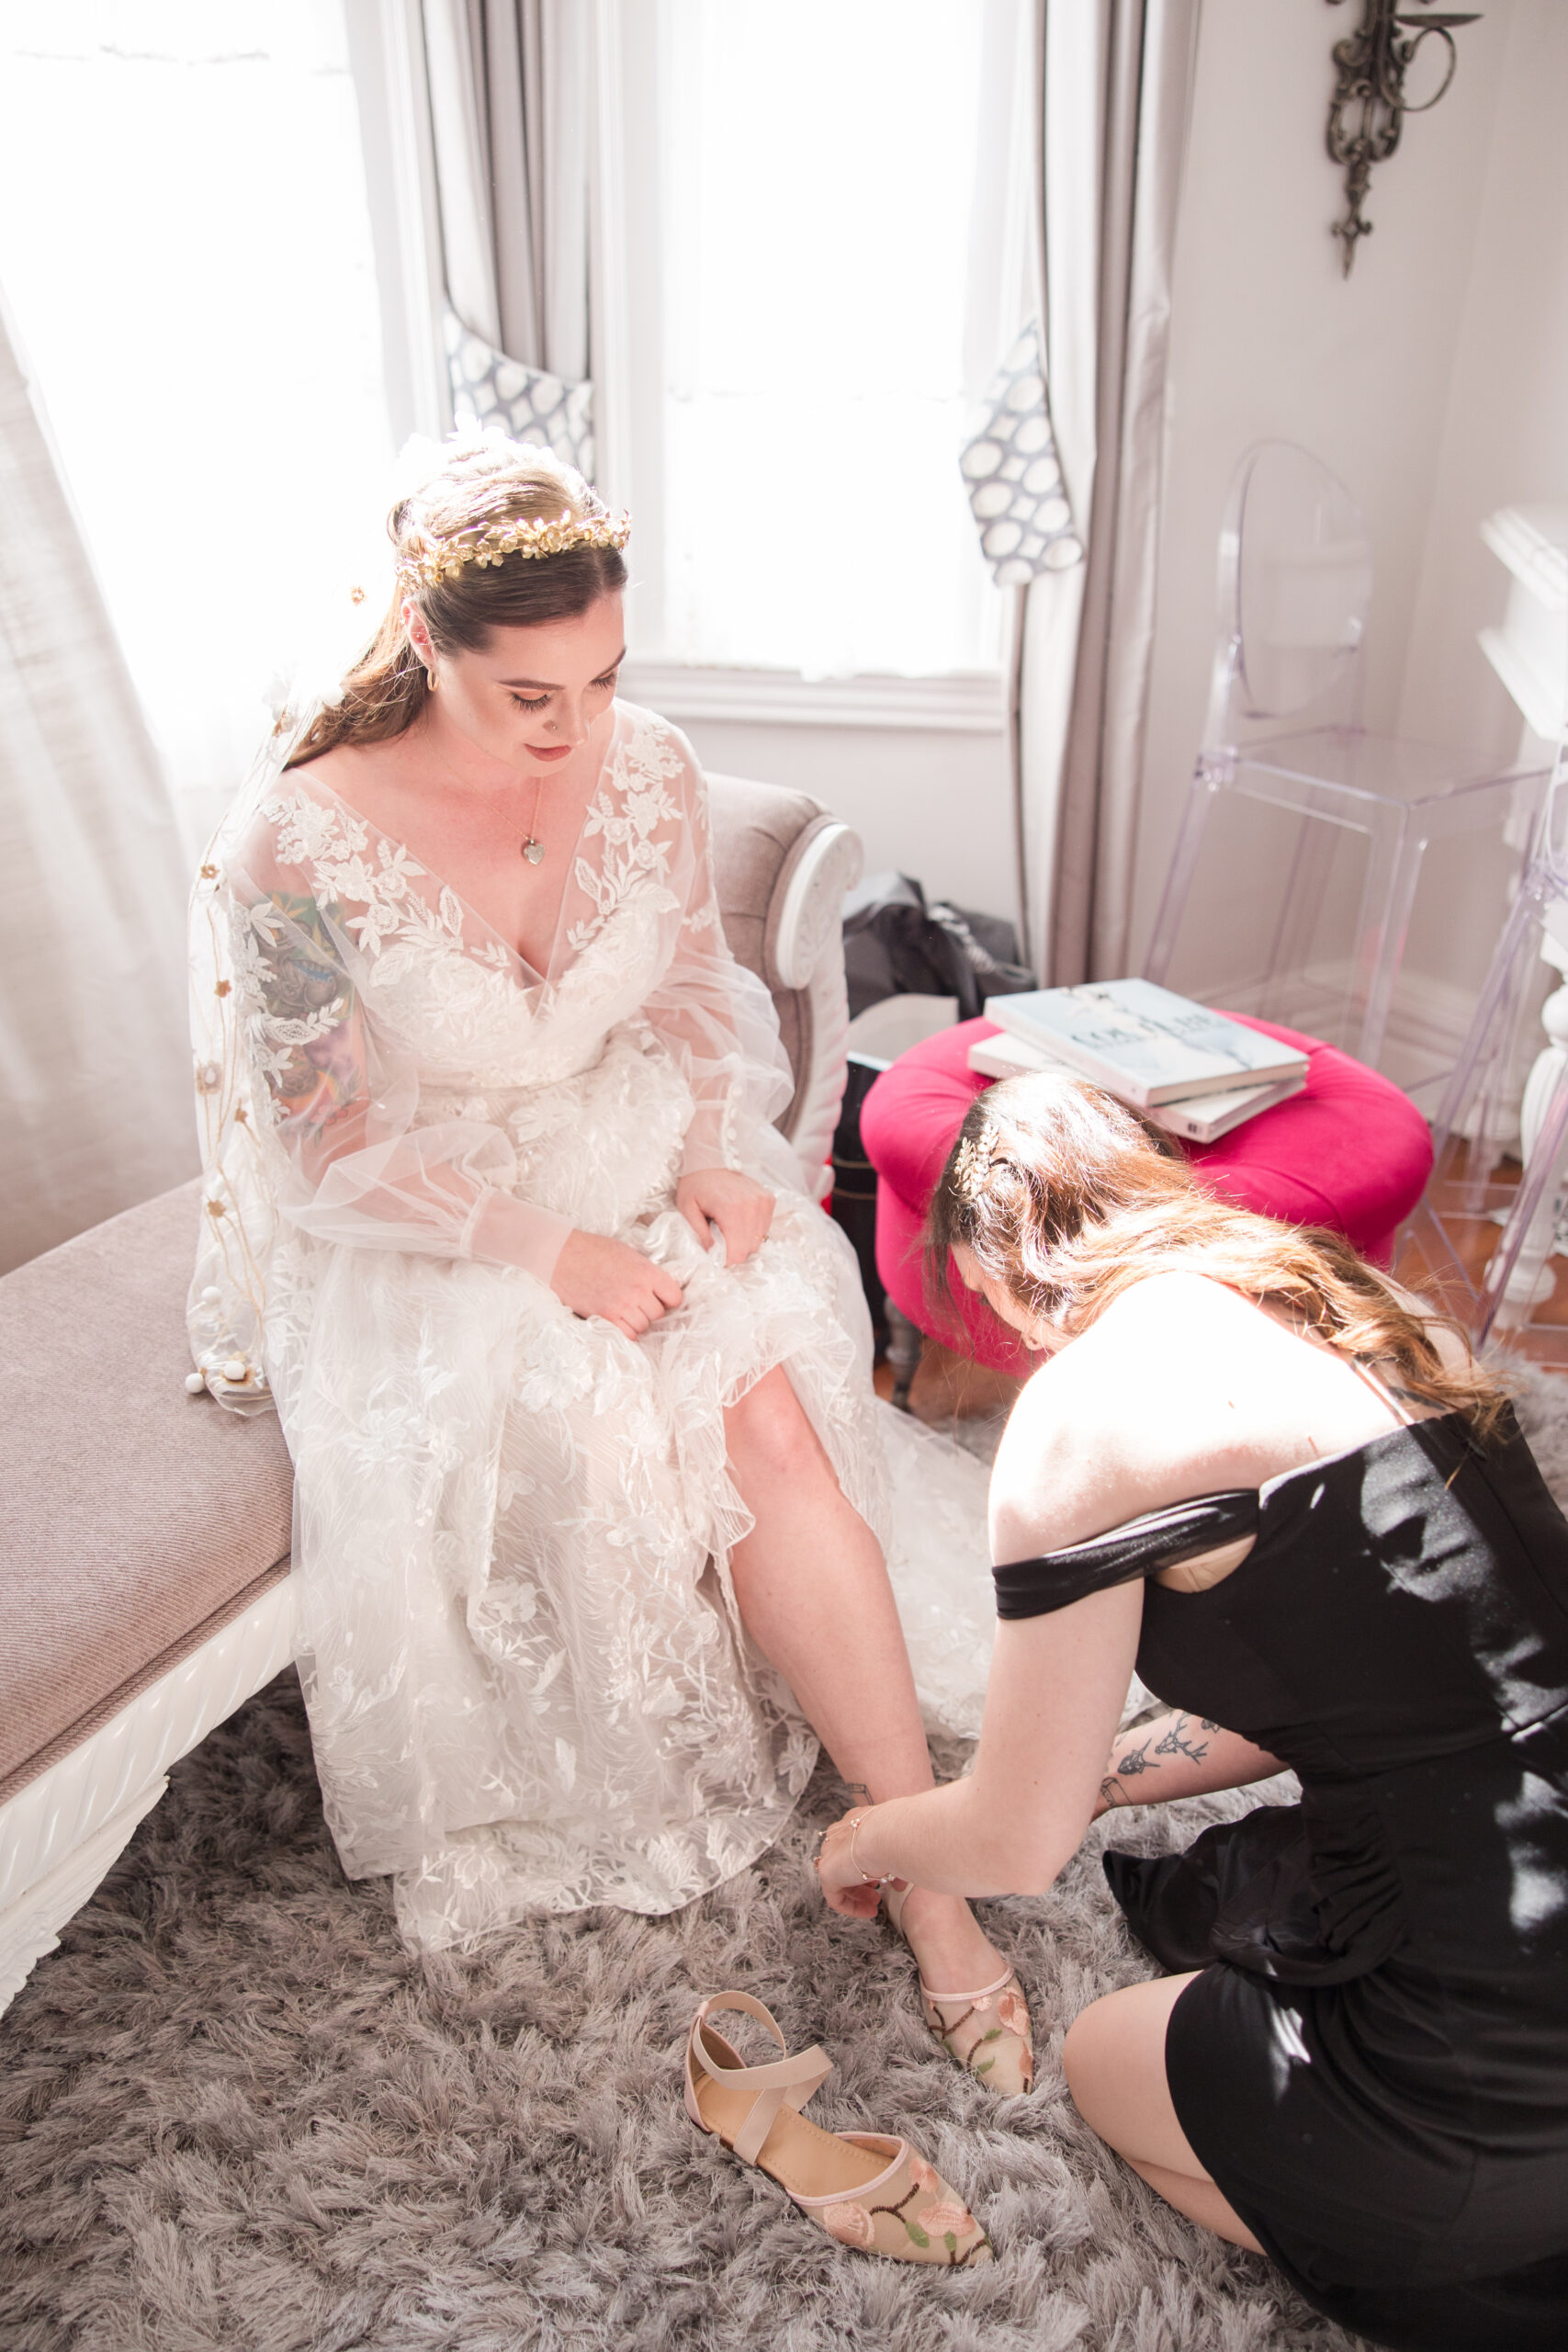 5 THINGS BRIDES FORGET